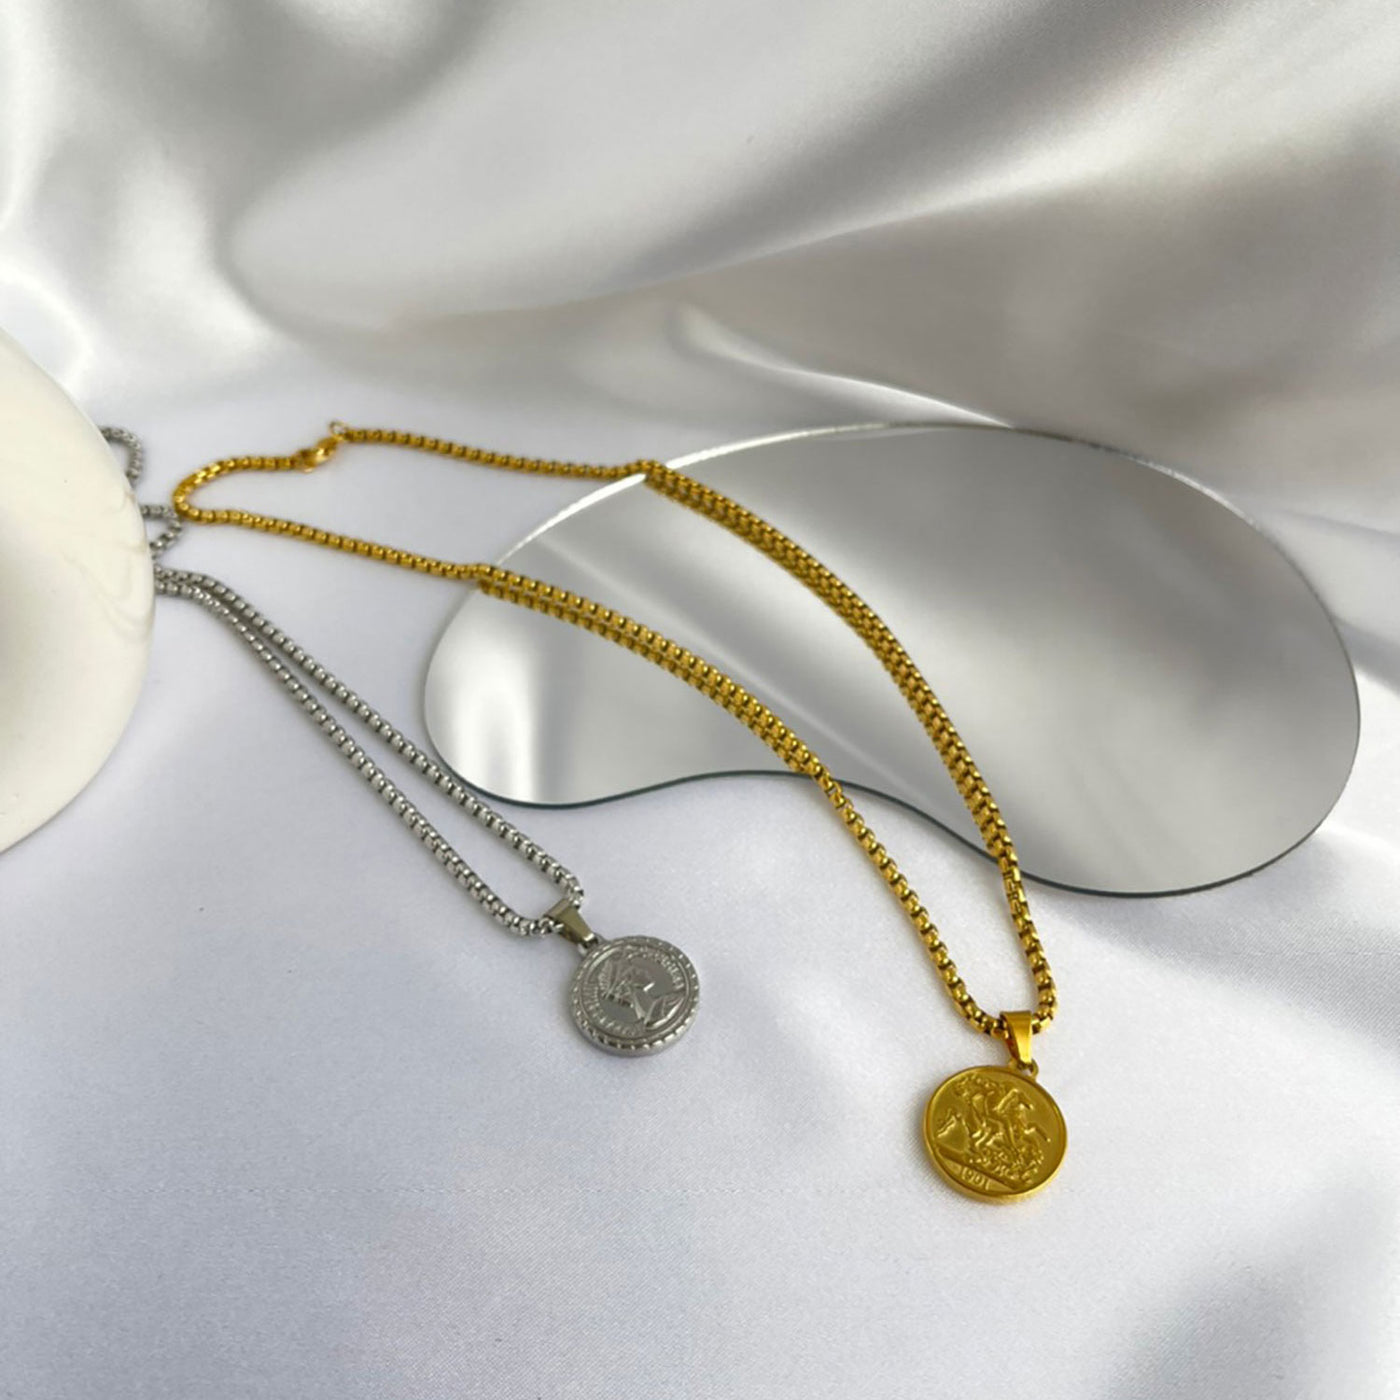 18k coin necklace.